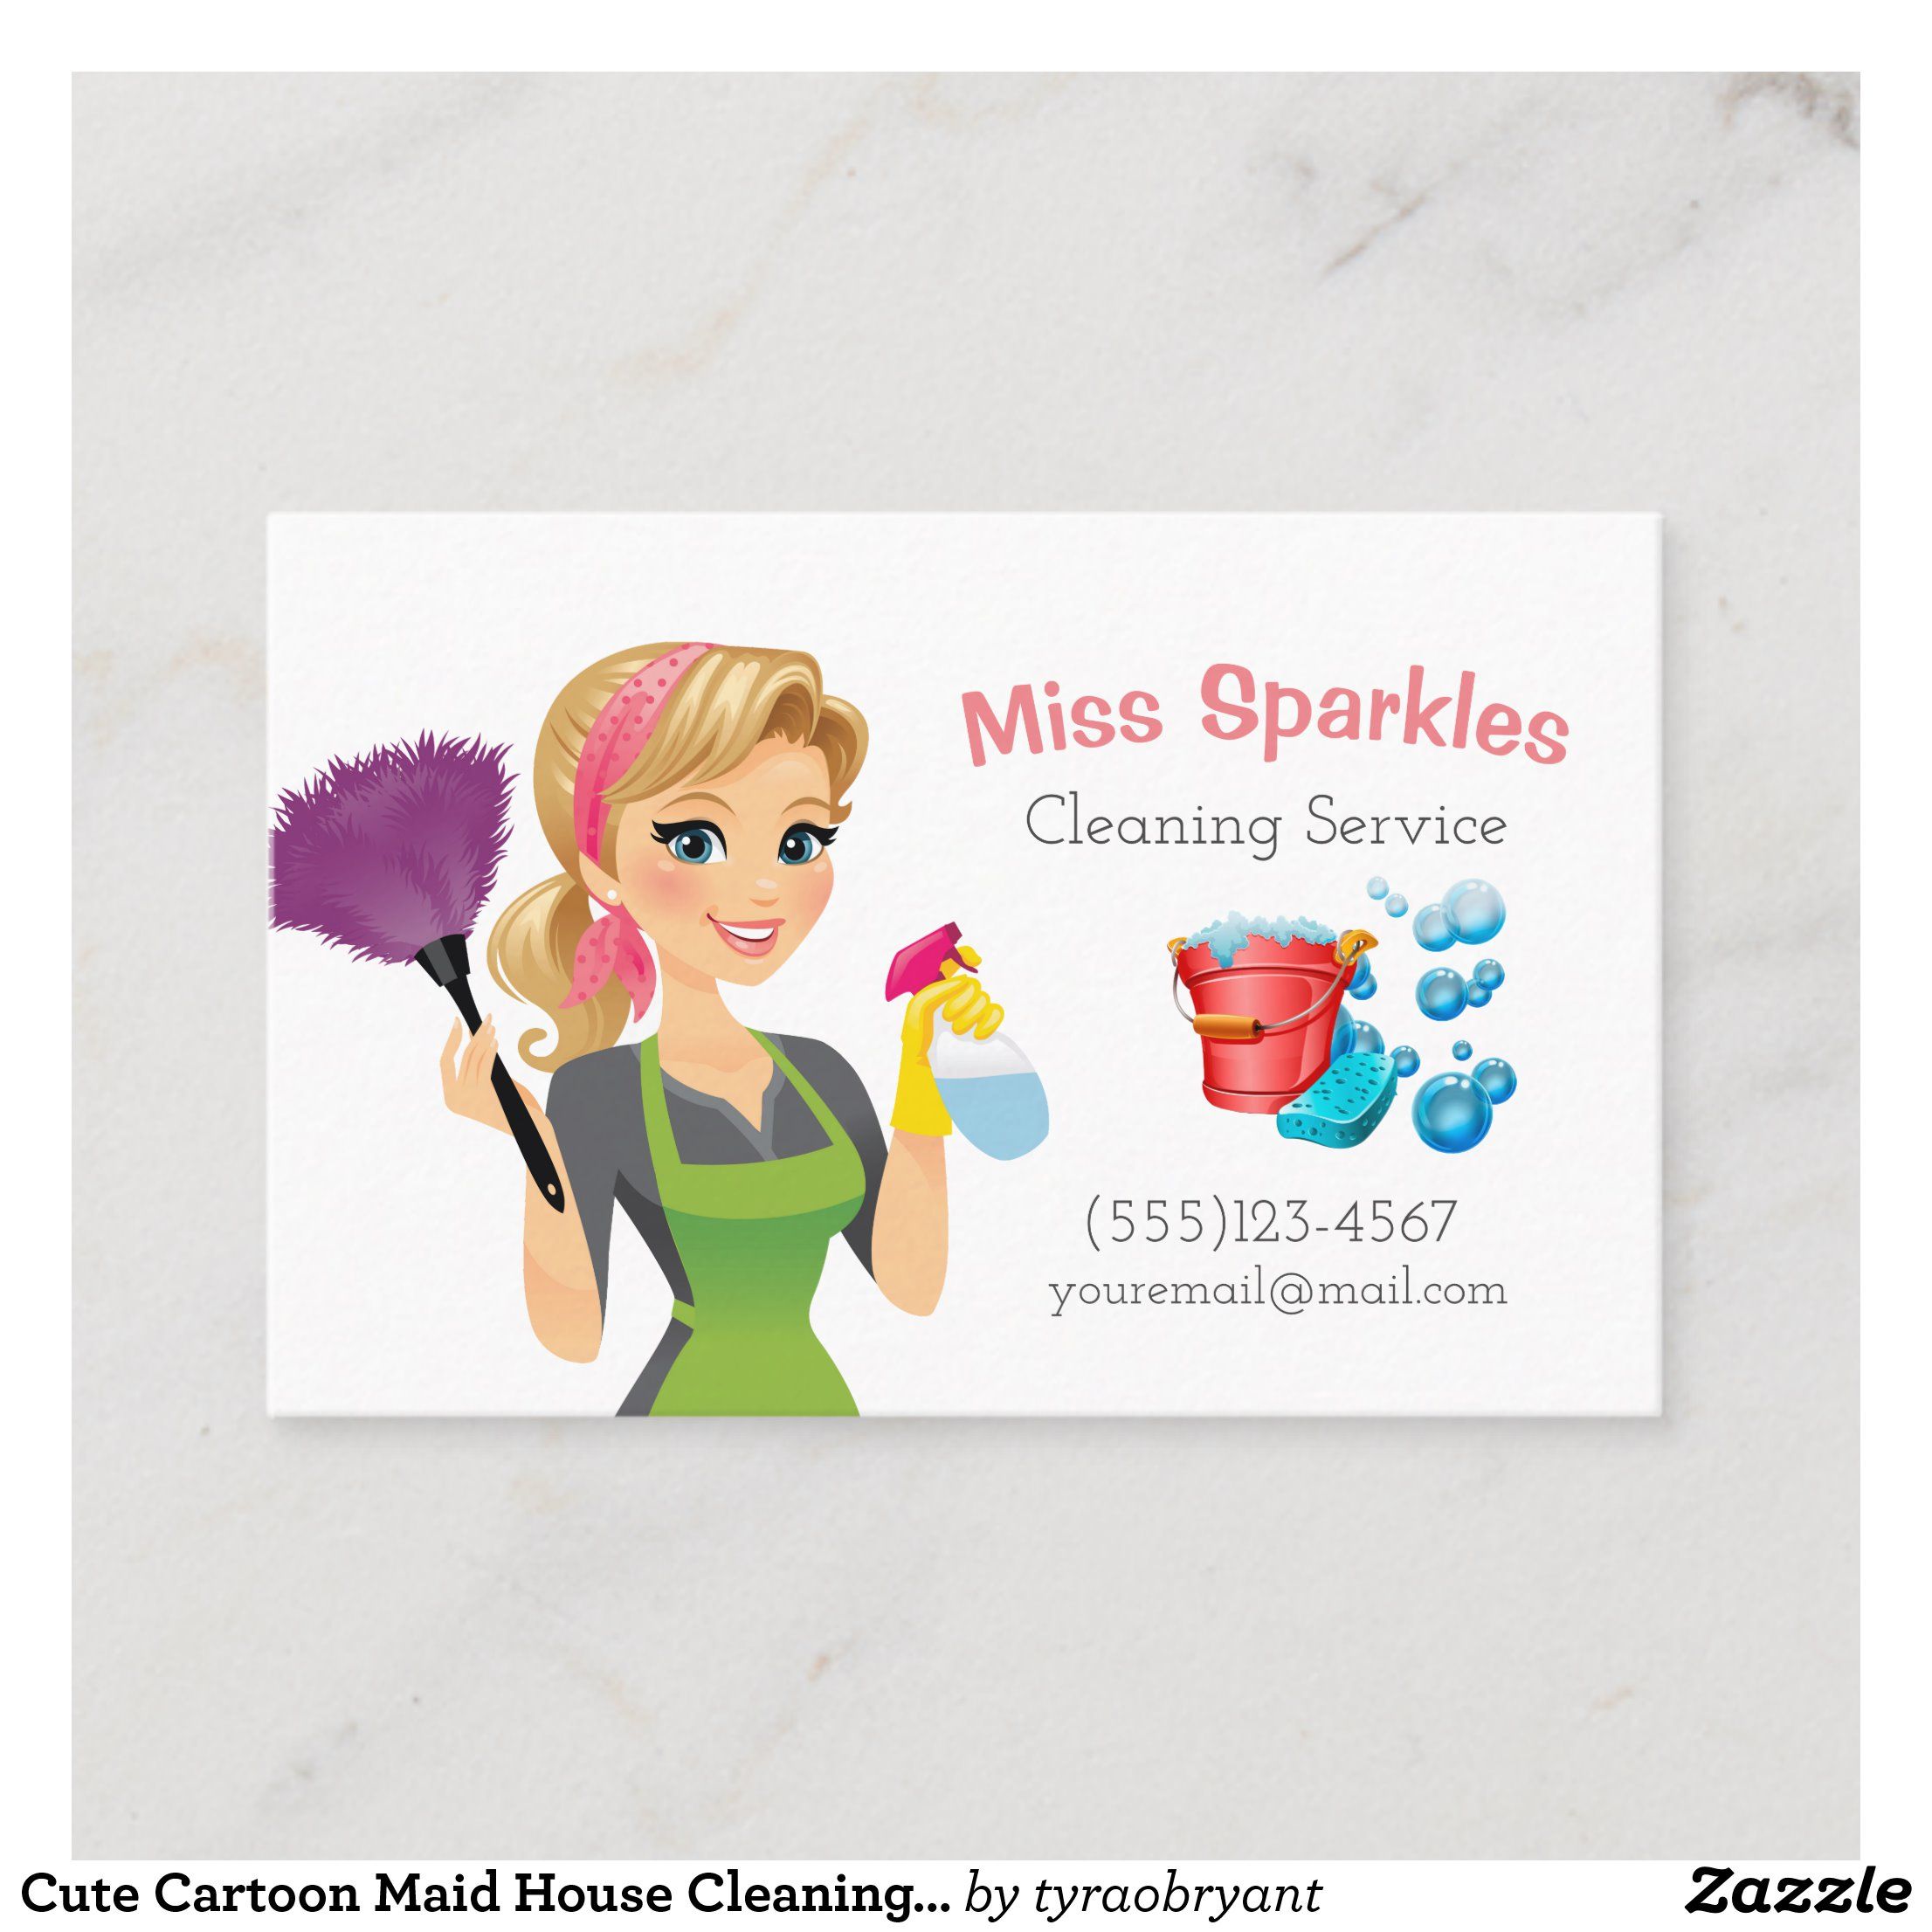 maid services business cards 2